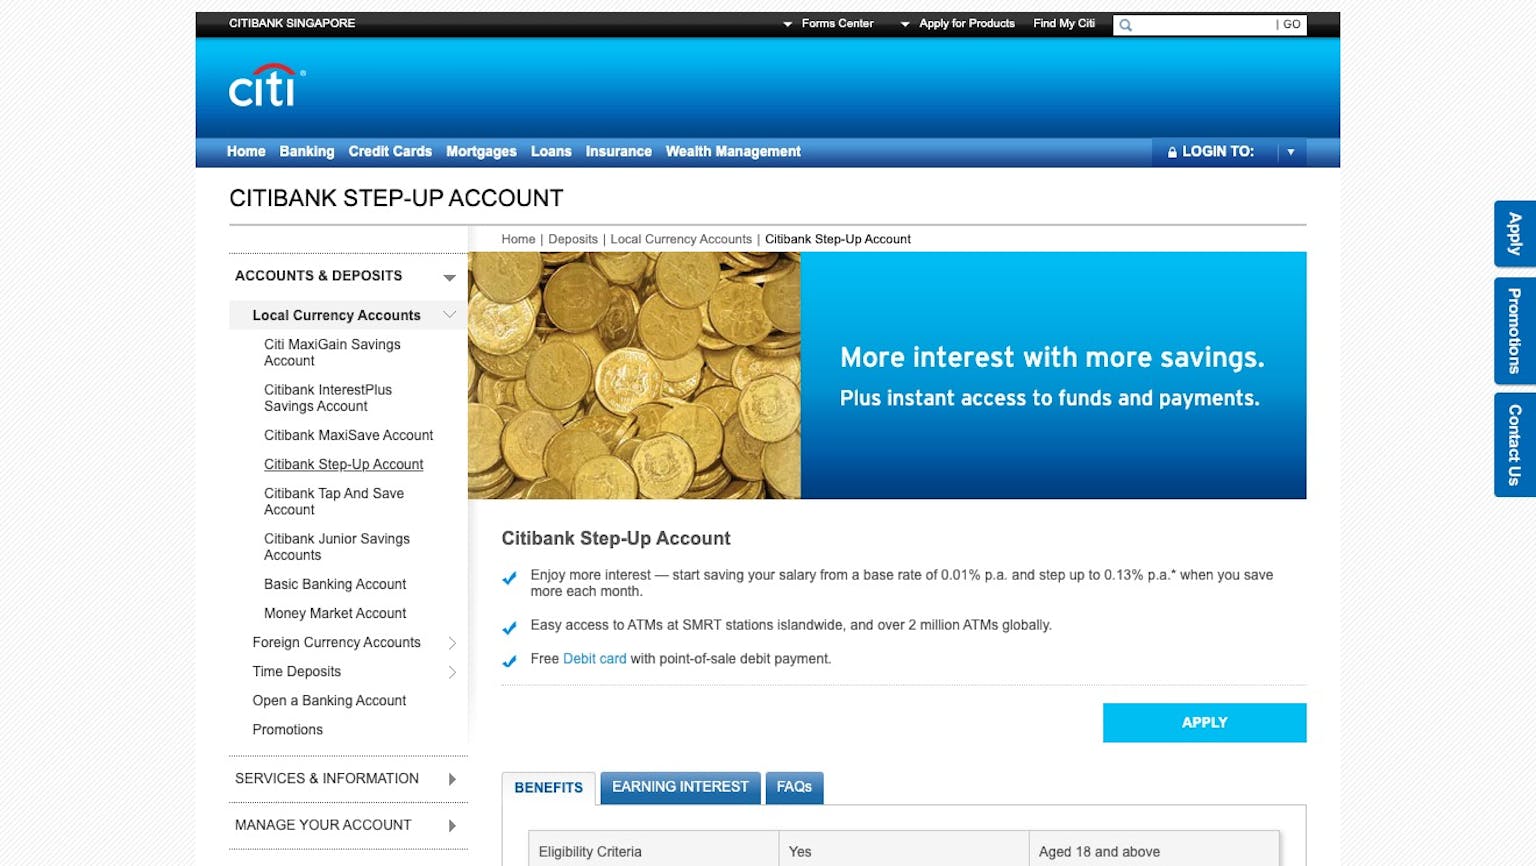 Citibank Step-Up Account